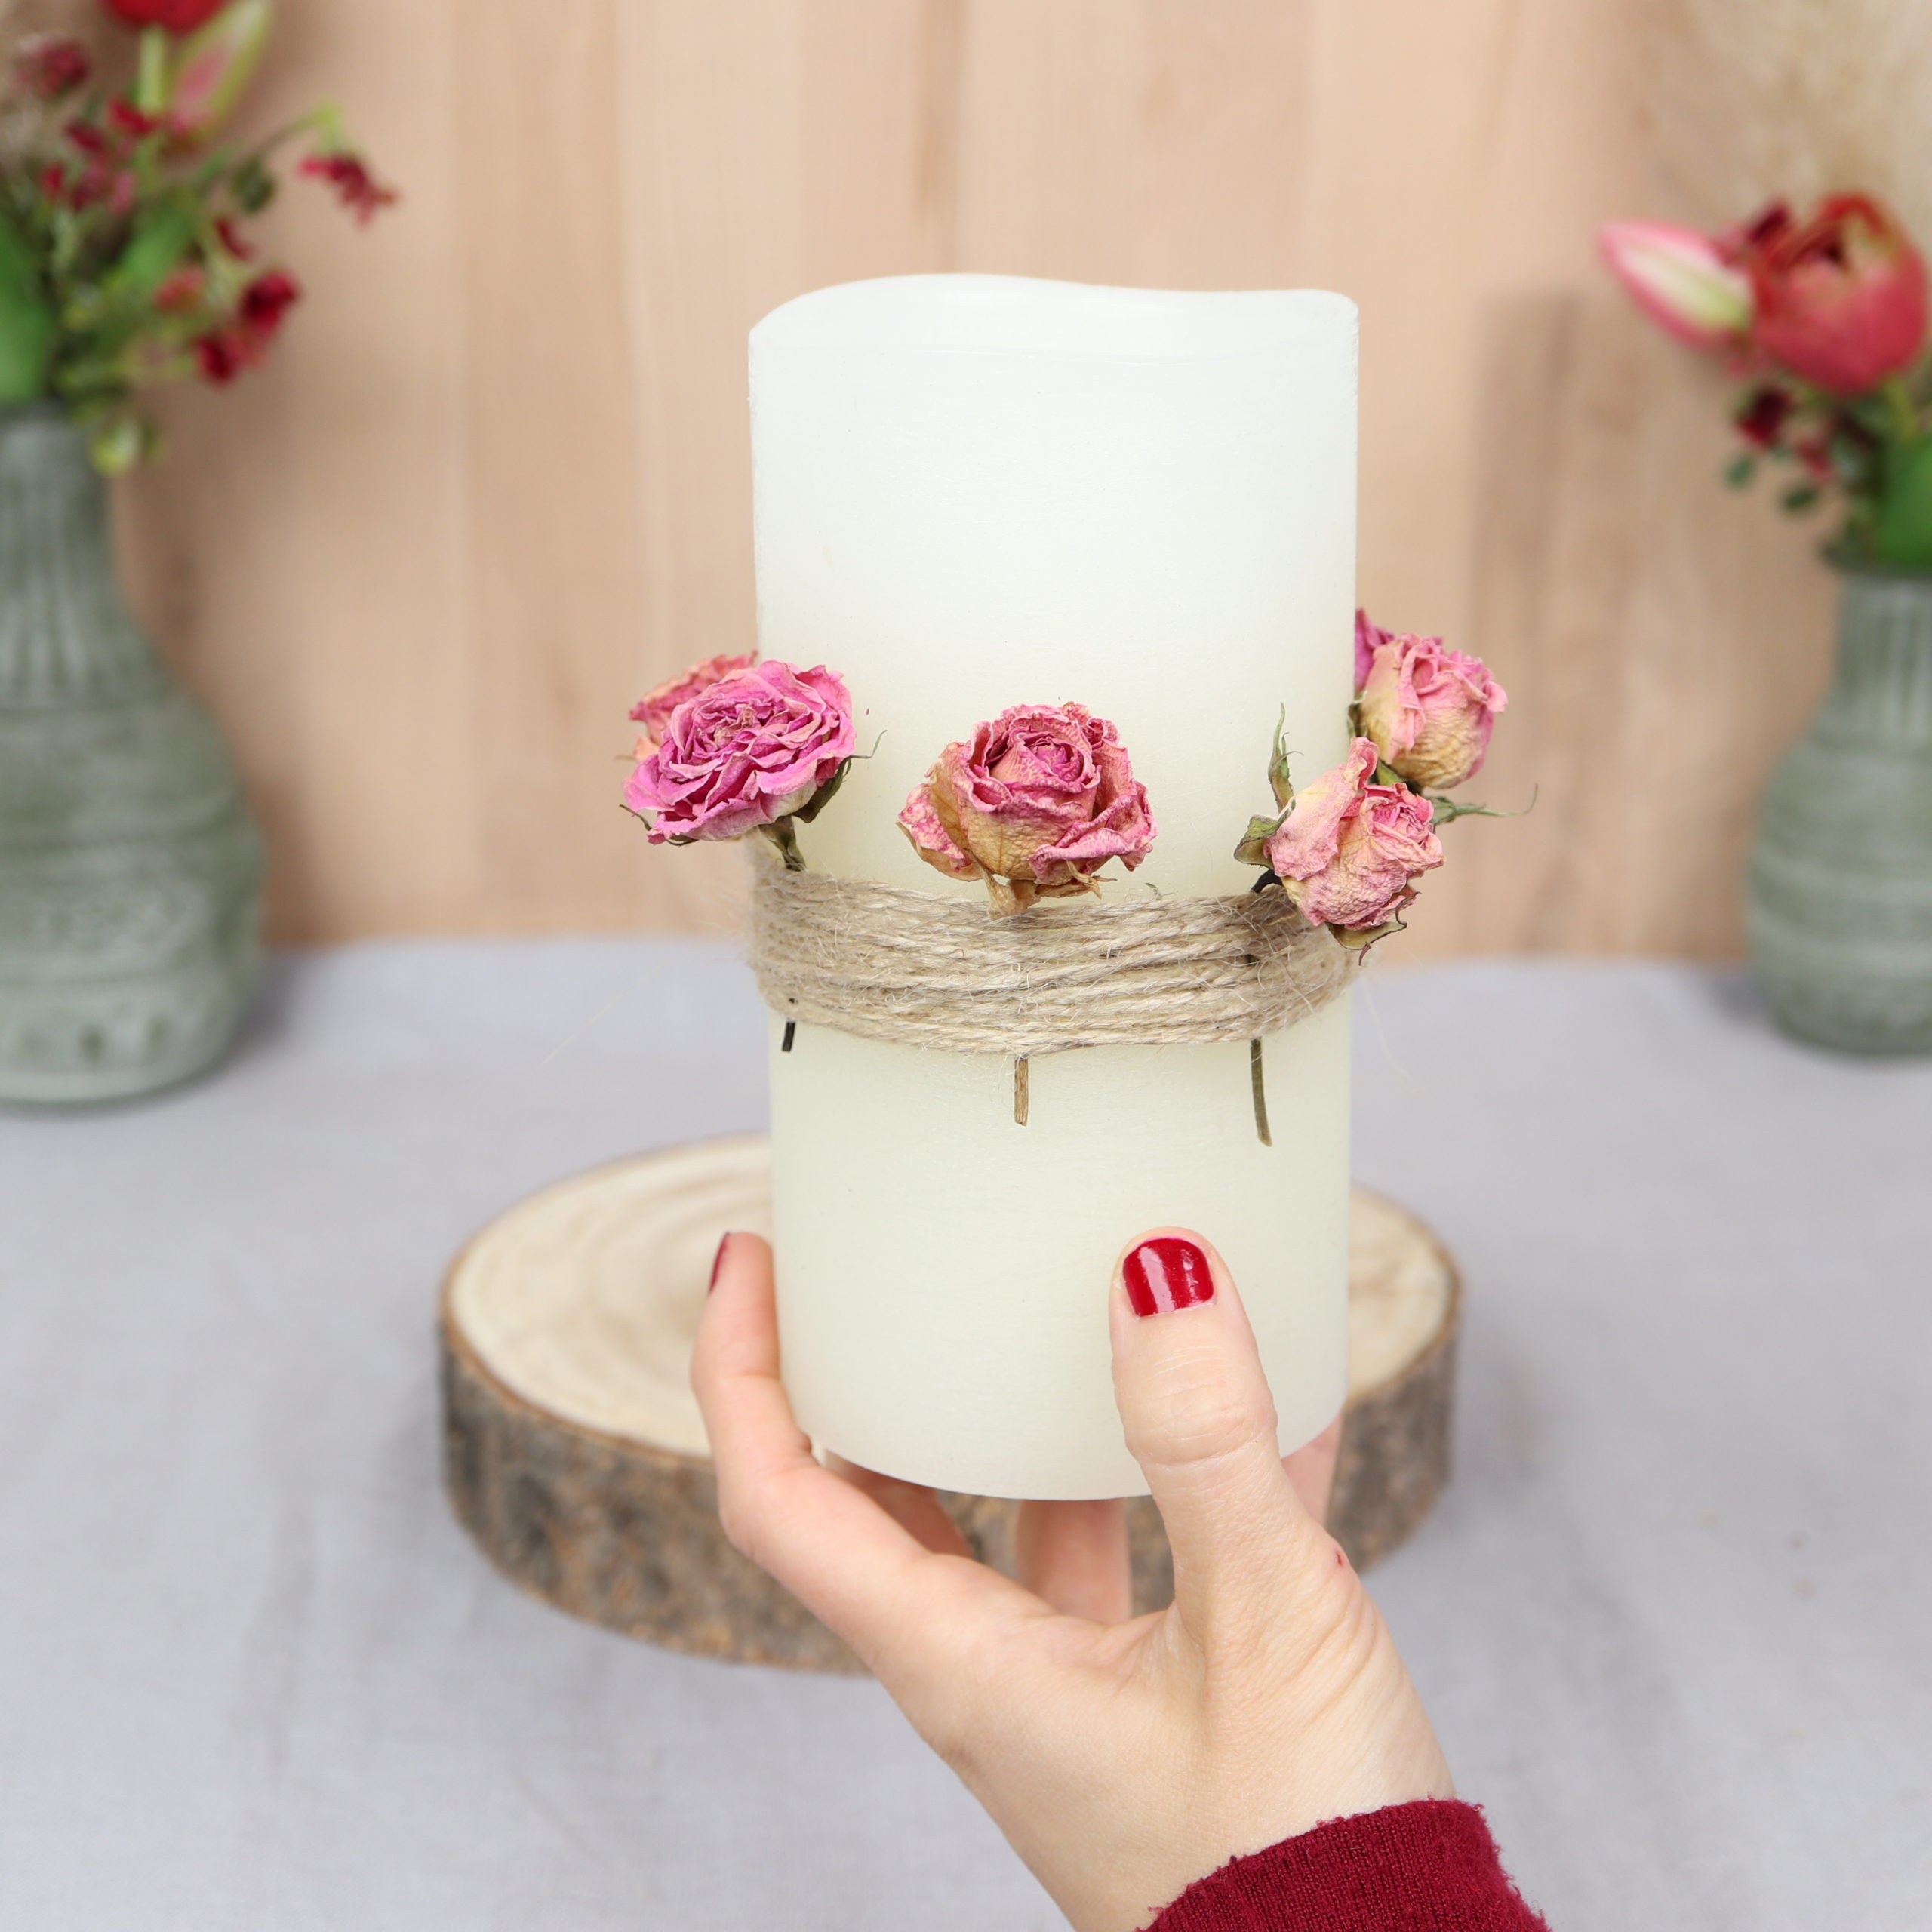 DIY  Romantic LED Candle Decoration with Dried Roses